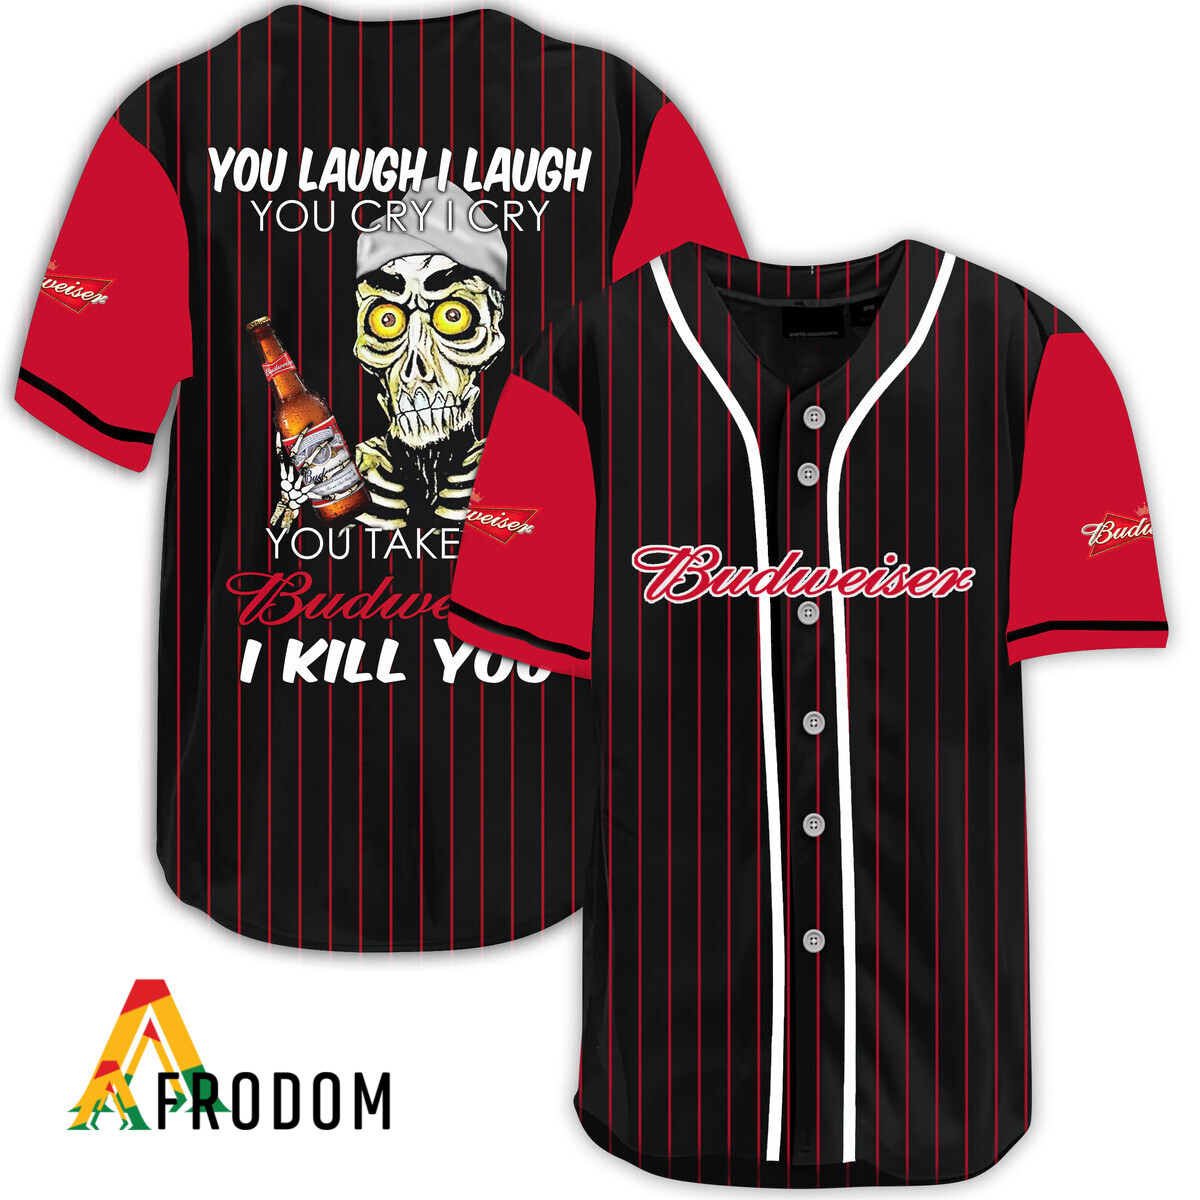 You Should Buy This Baseball Jersey As A Gift For Someone Special For Halloween Word2